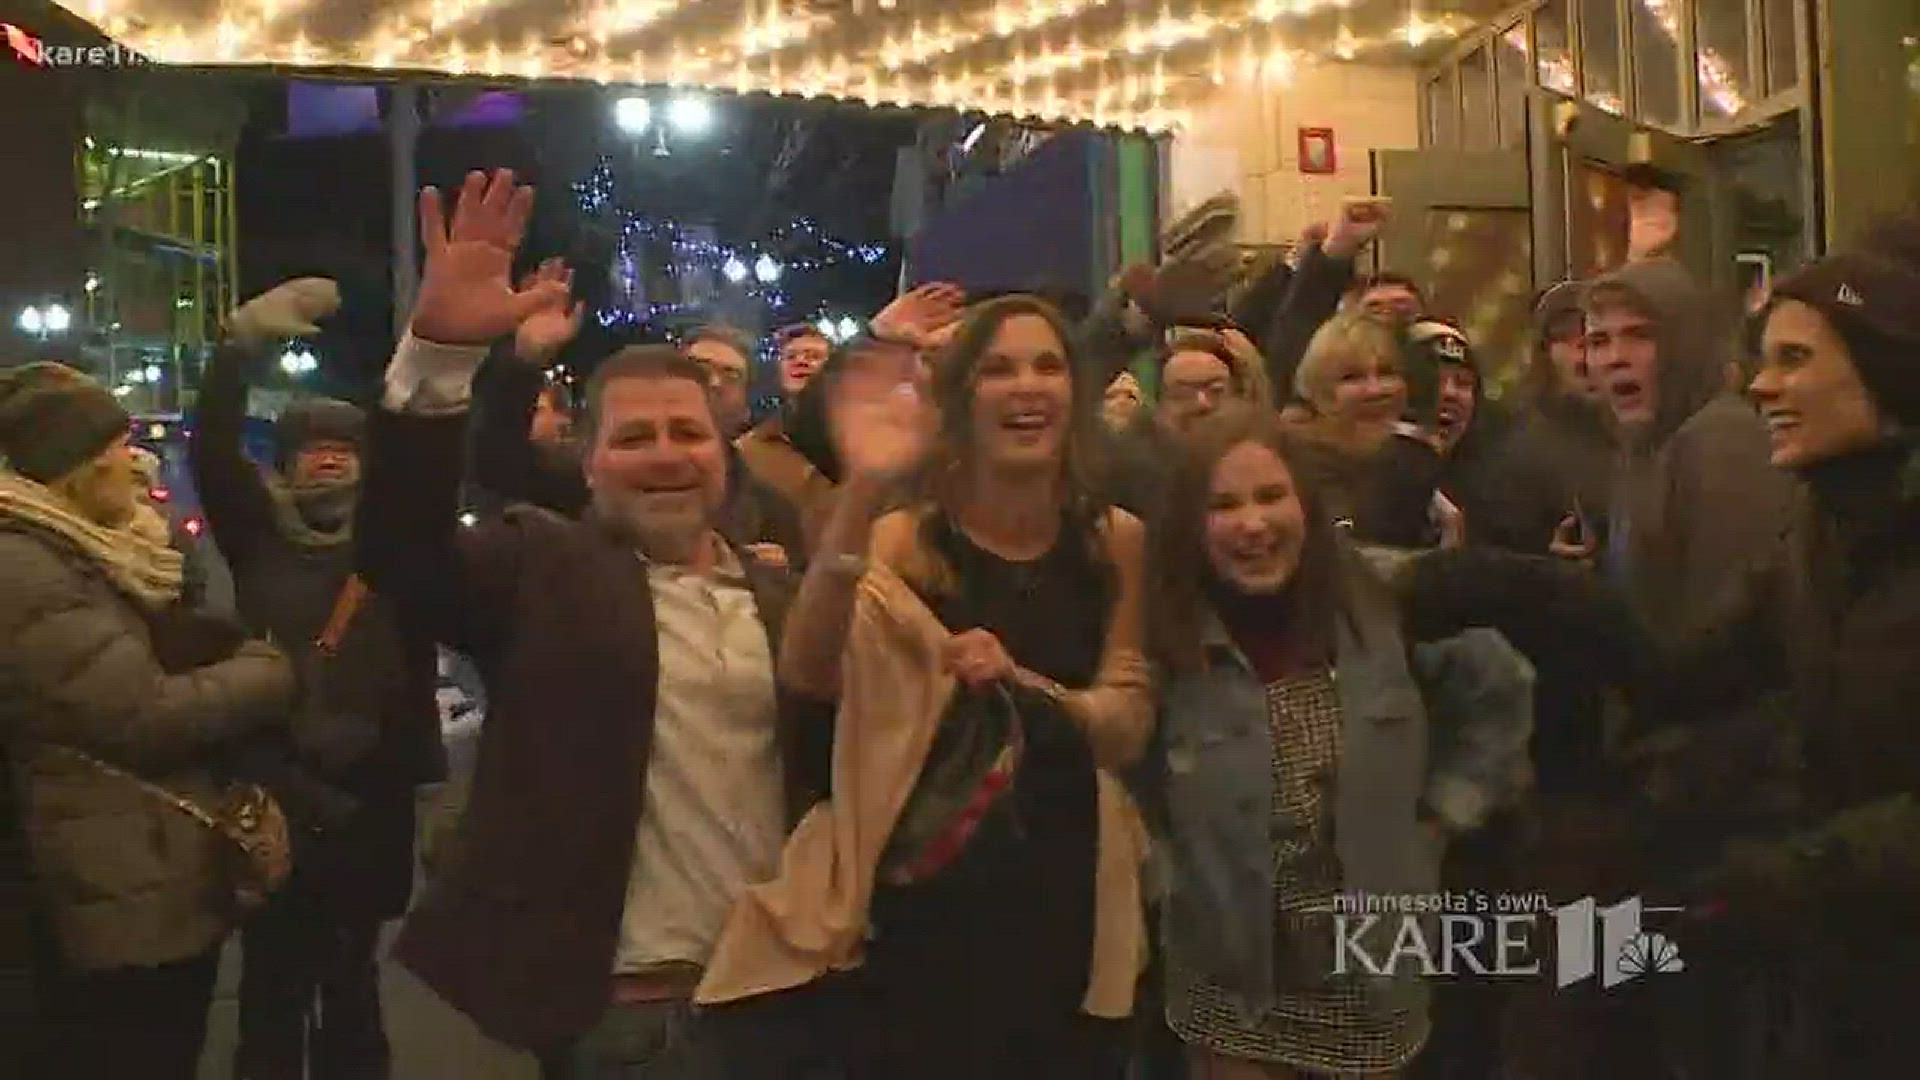 Fans waited in line to see Jimmy Fallon live from Minneapolis on Sunday night after the Super Bowl.